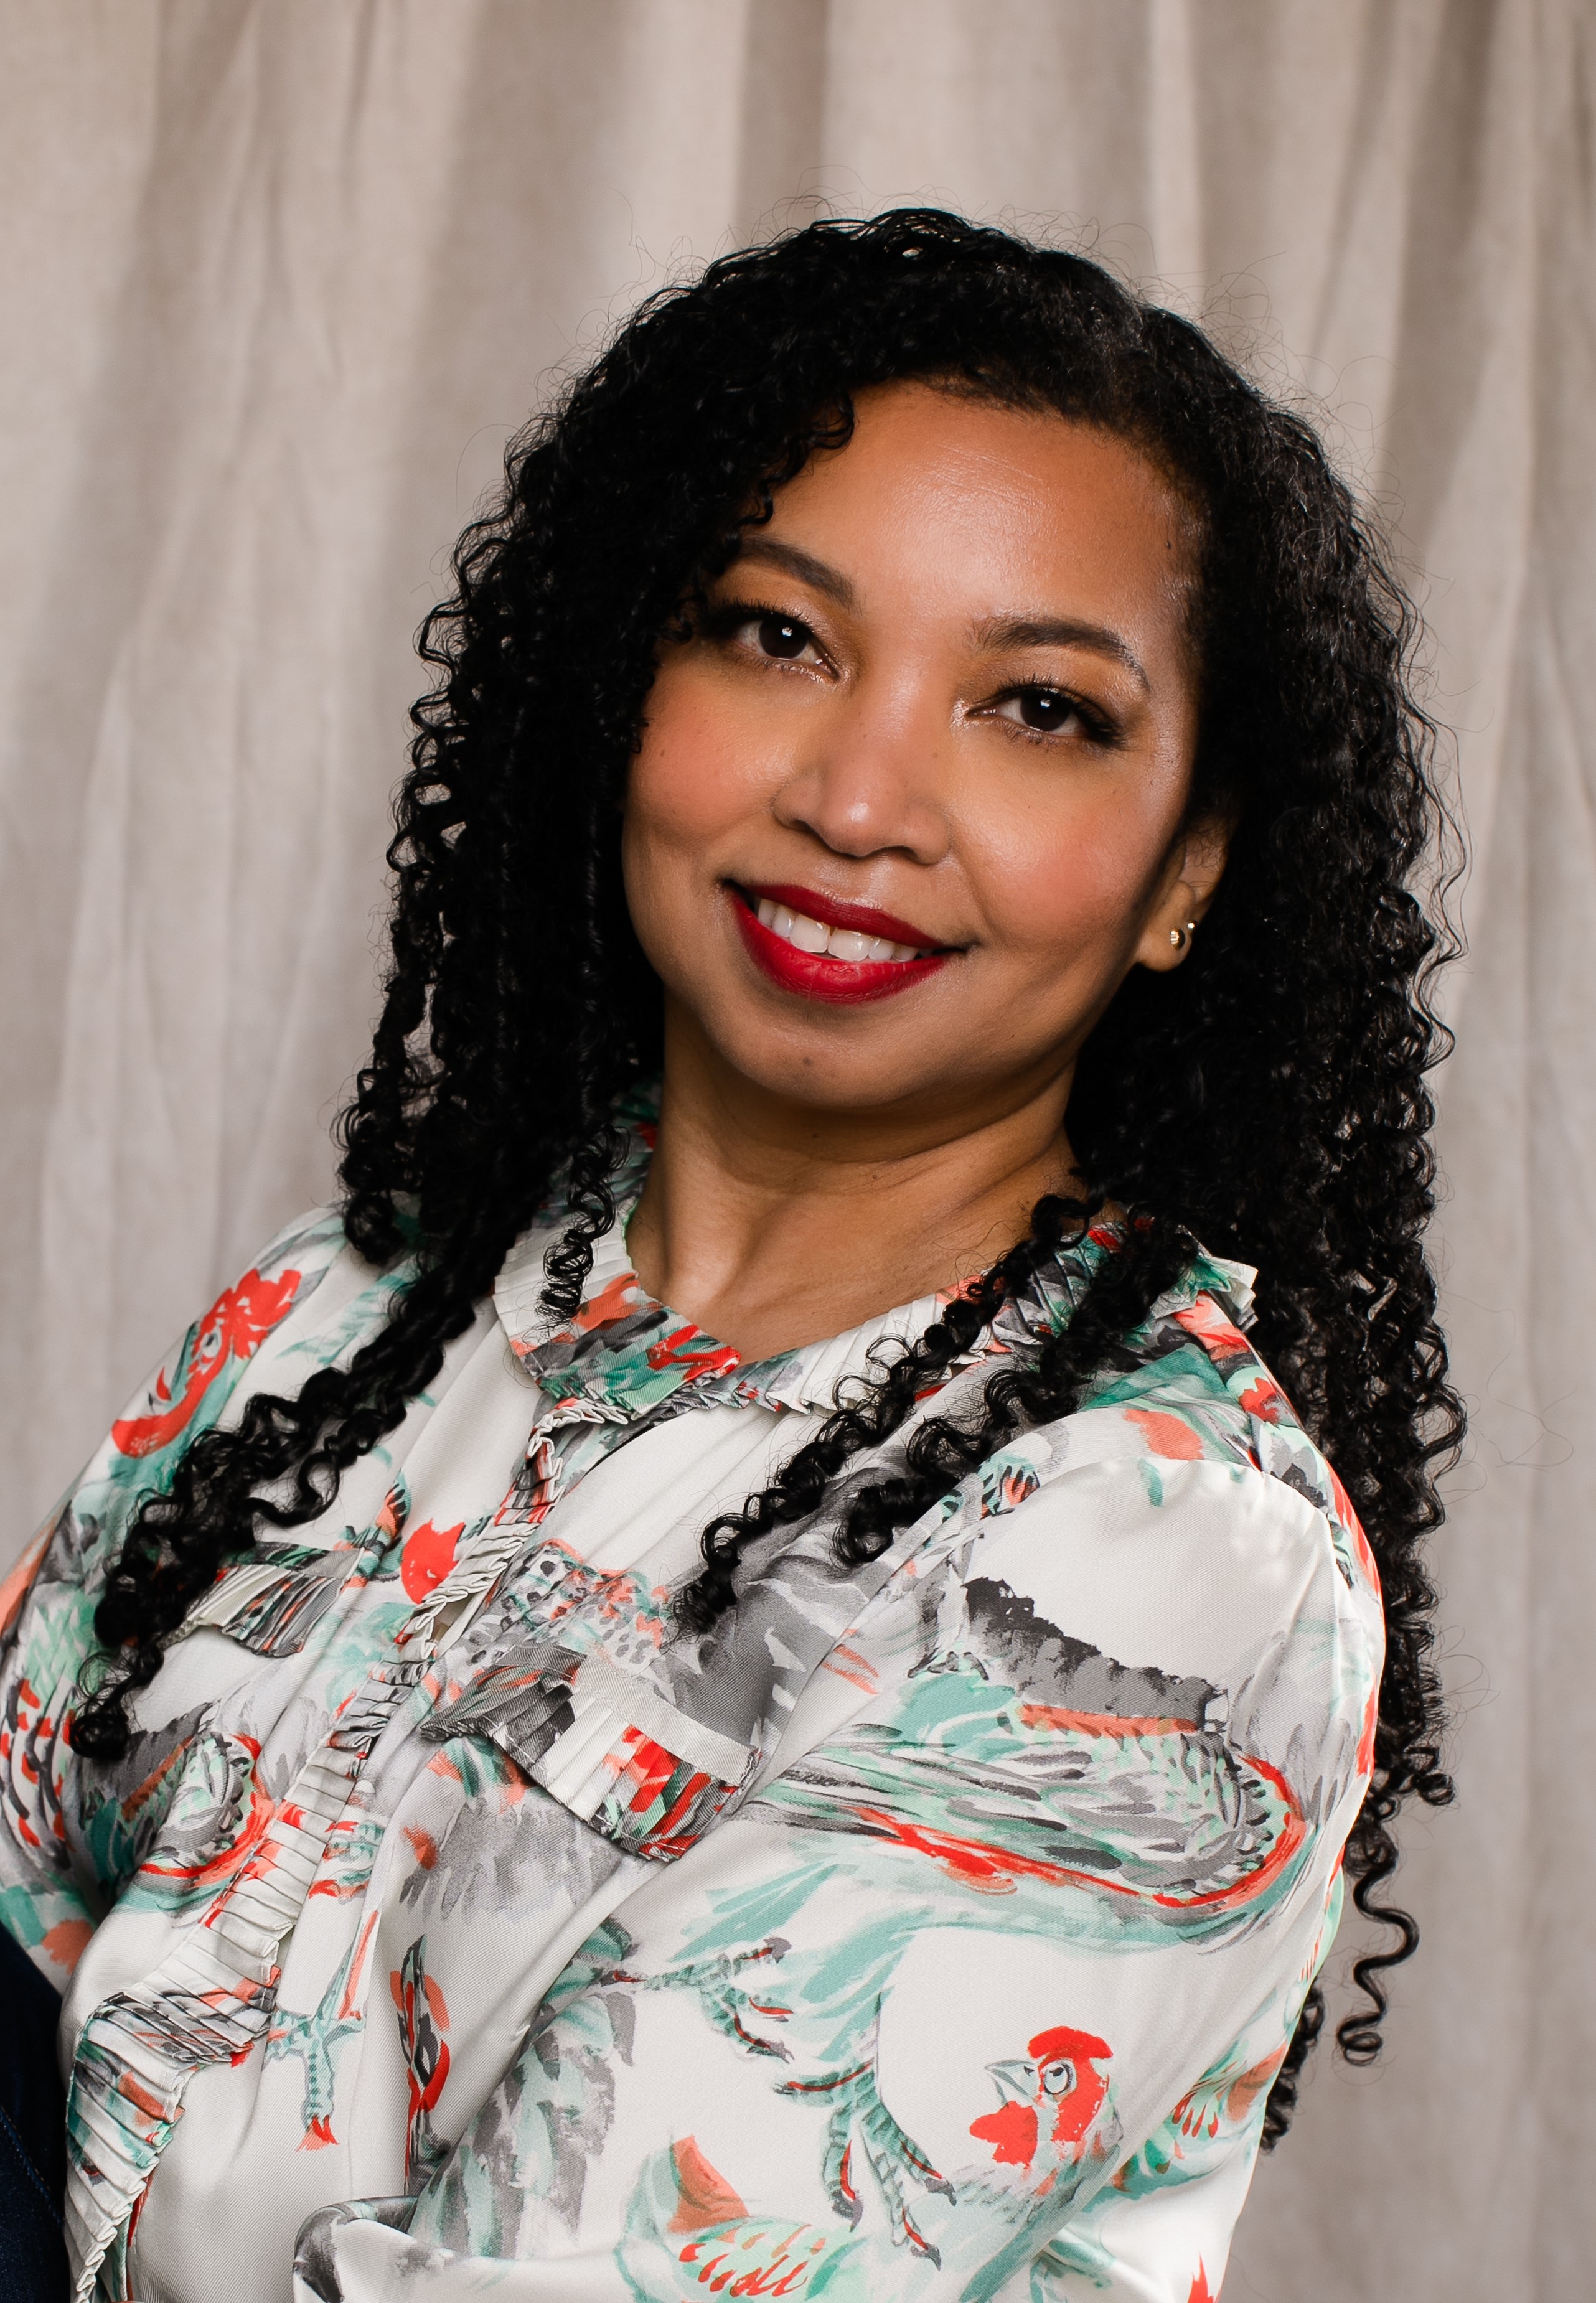 Photo of Black woman with long back curly hair, wearing a print shirt in white, blue and orange.